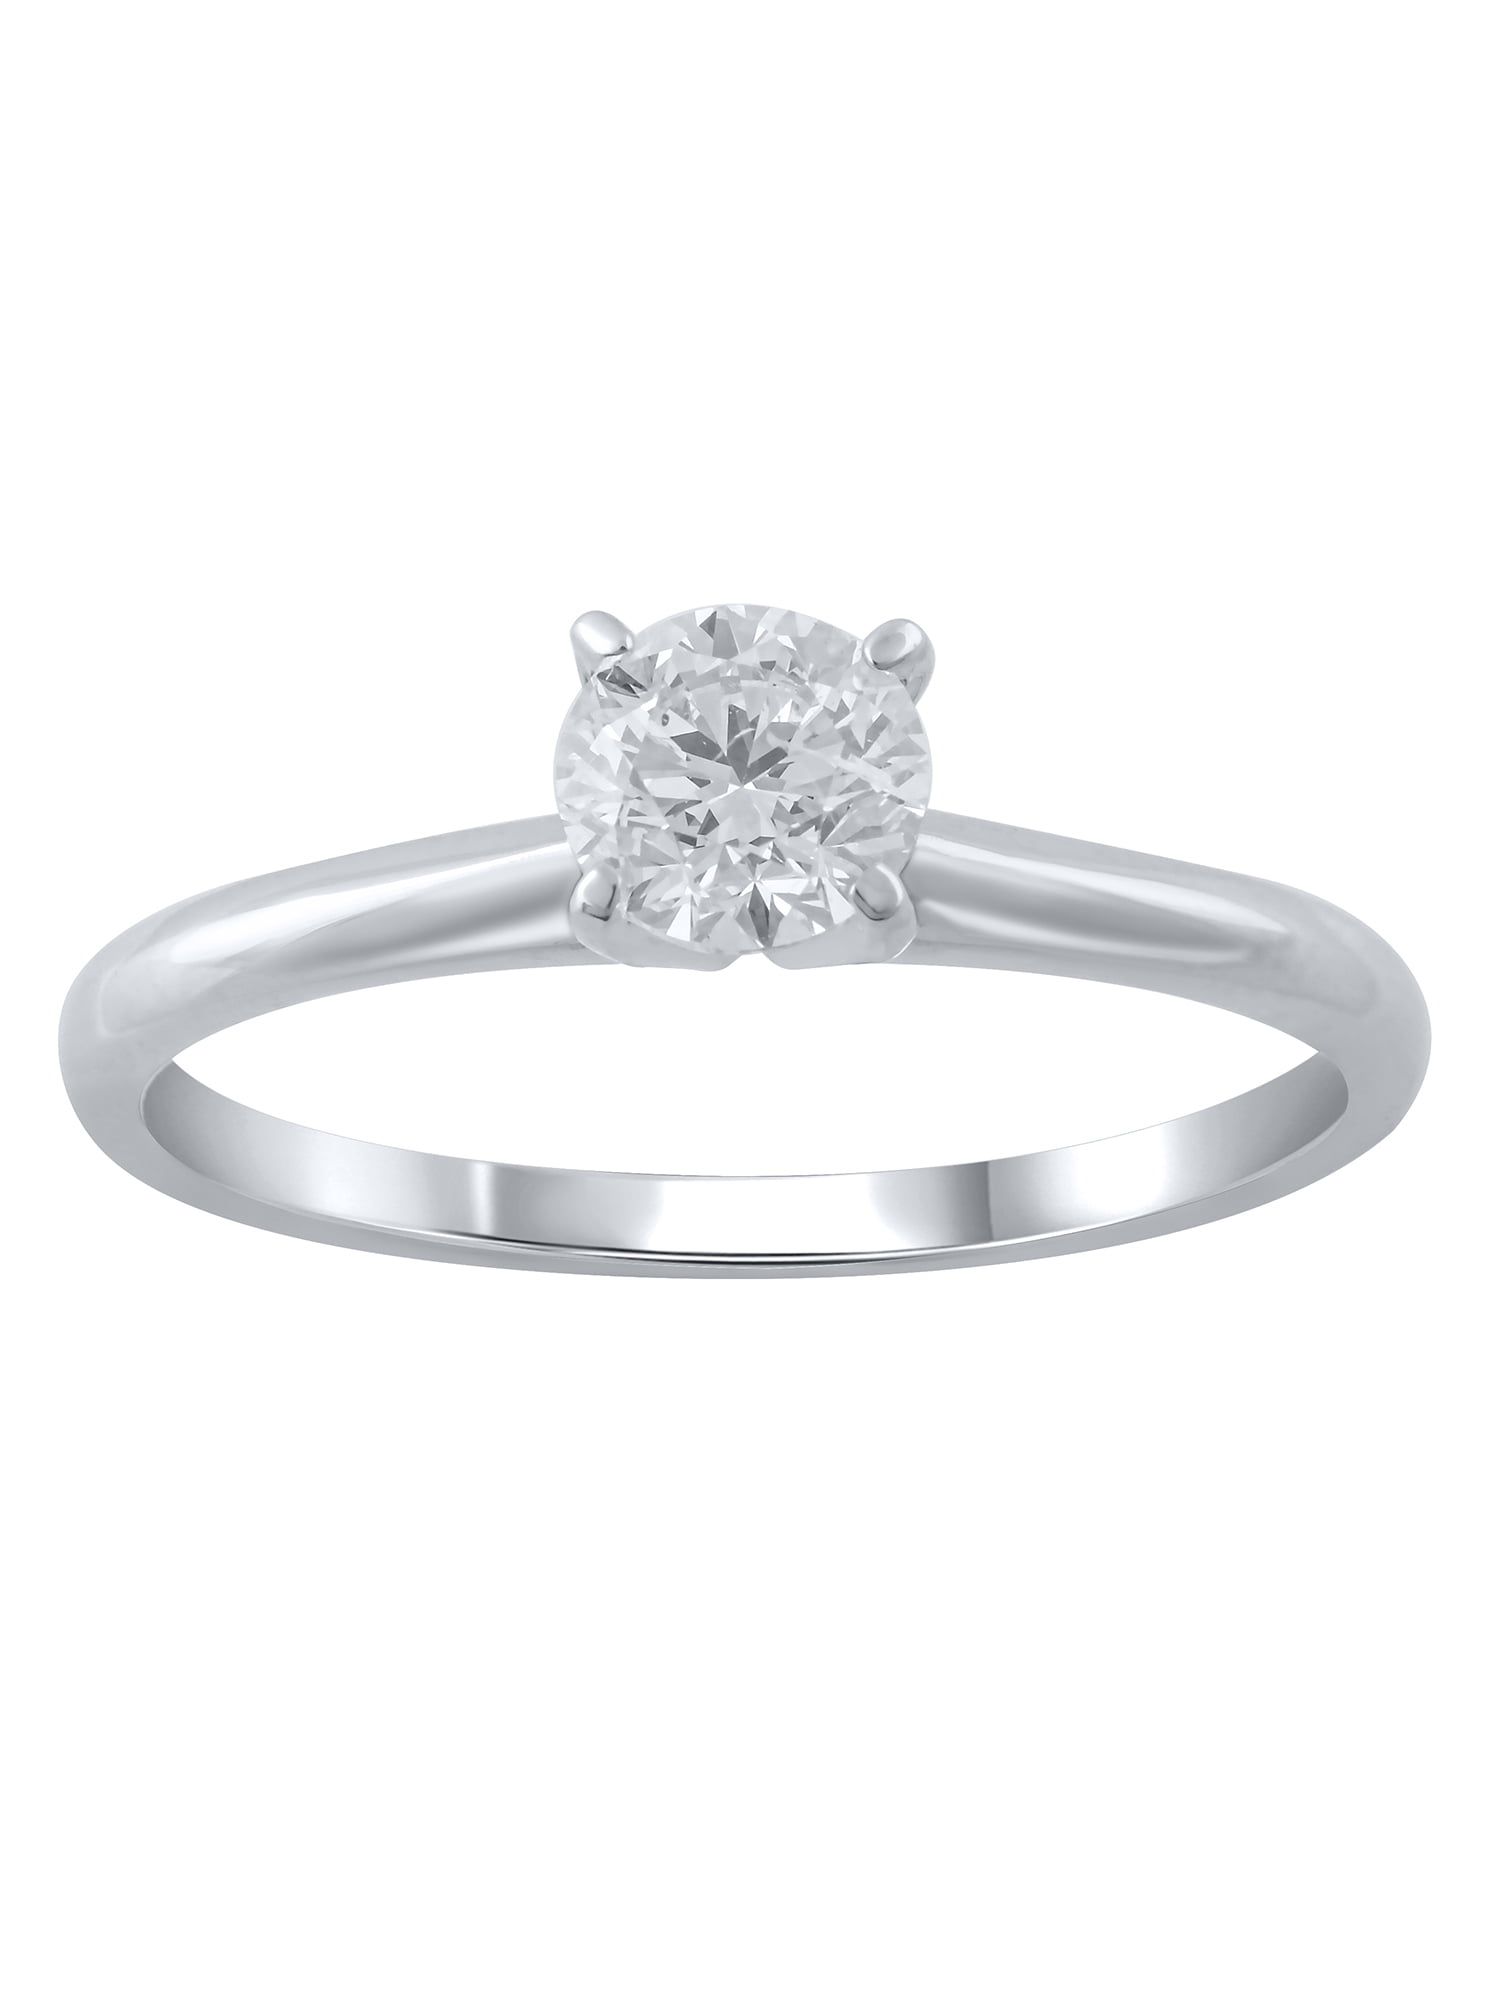 9ct white gold finish solitaire created diamond ring size P 